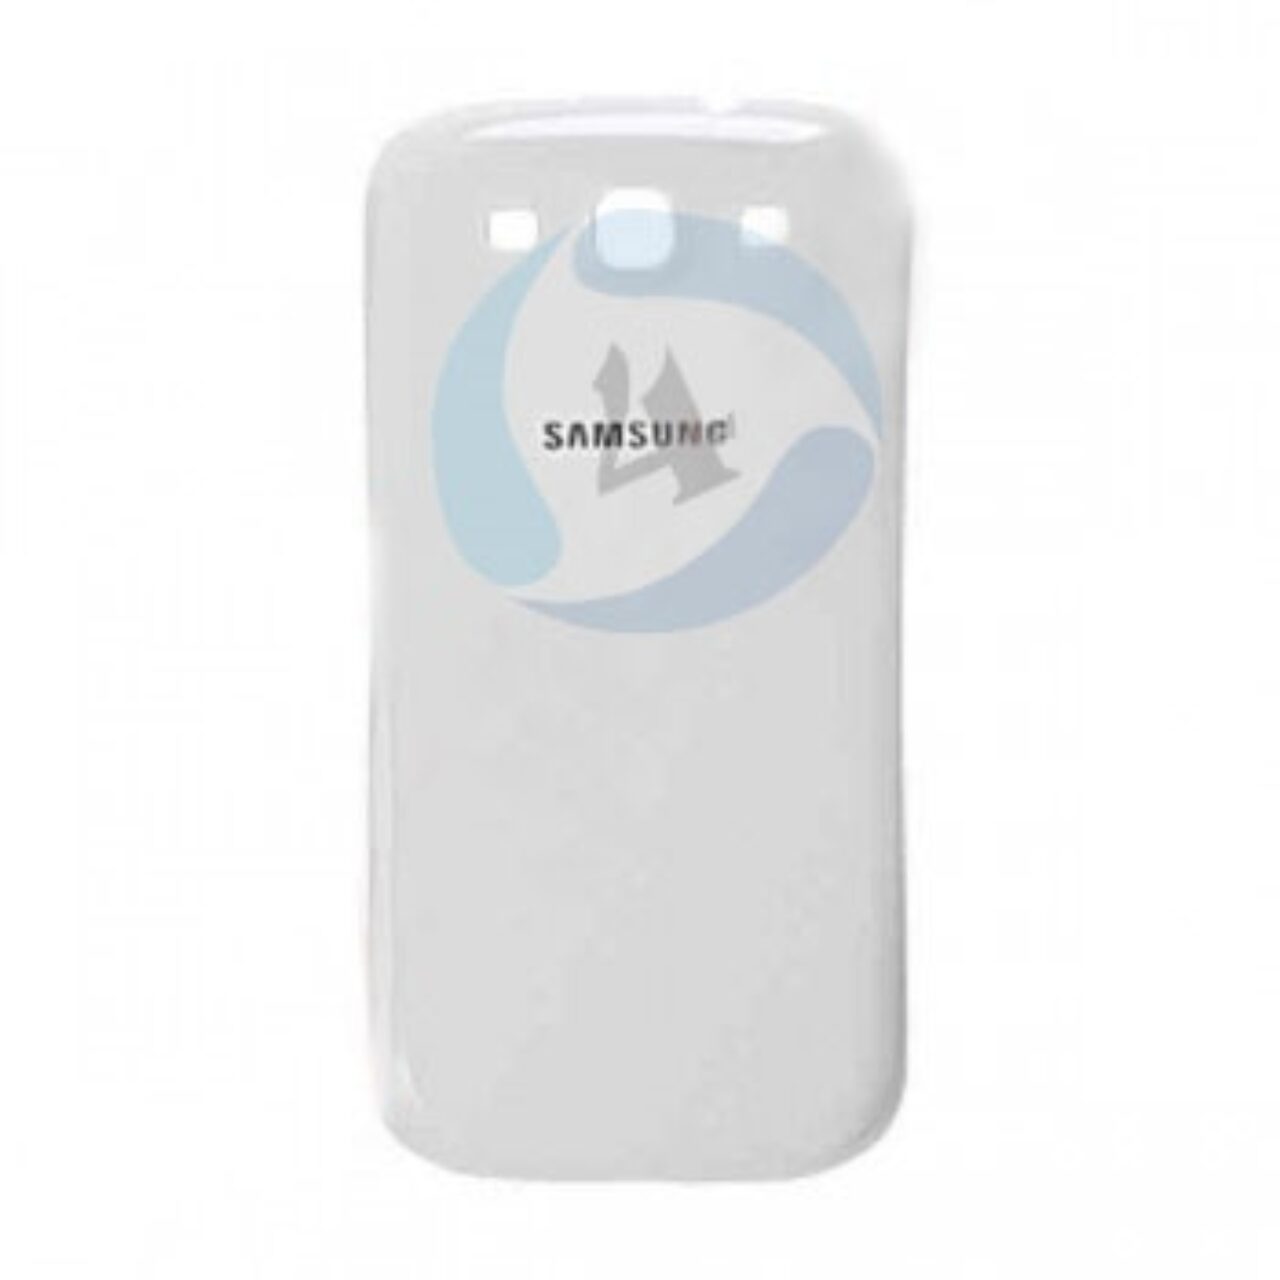 Samsung galaxy s3 i9300 battery cover marble white